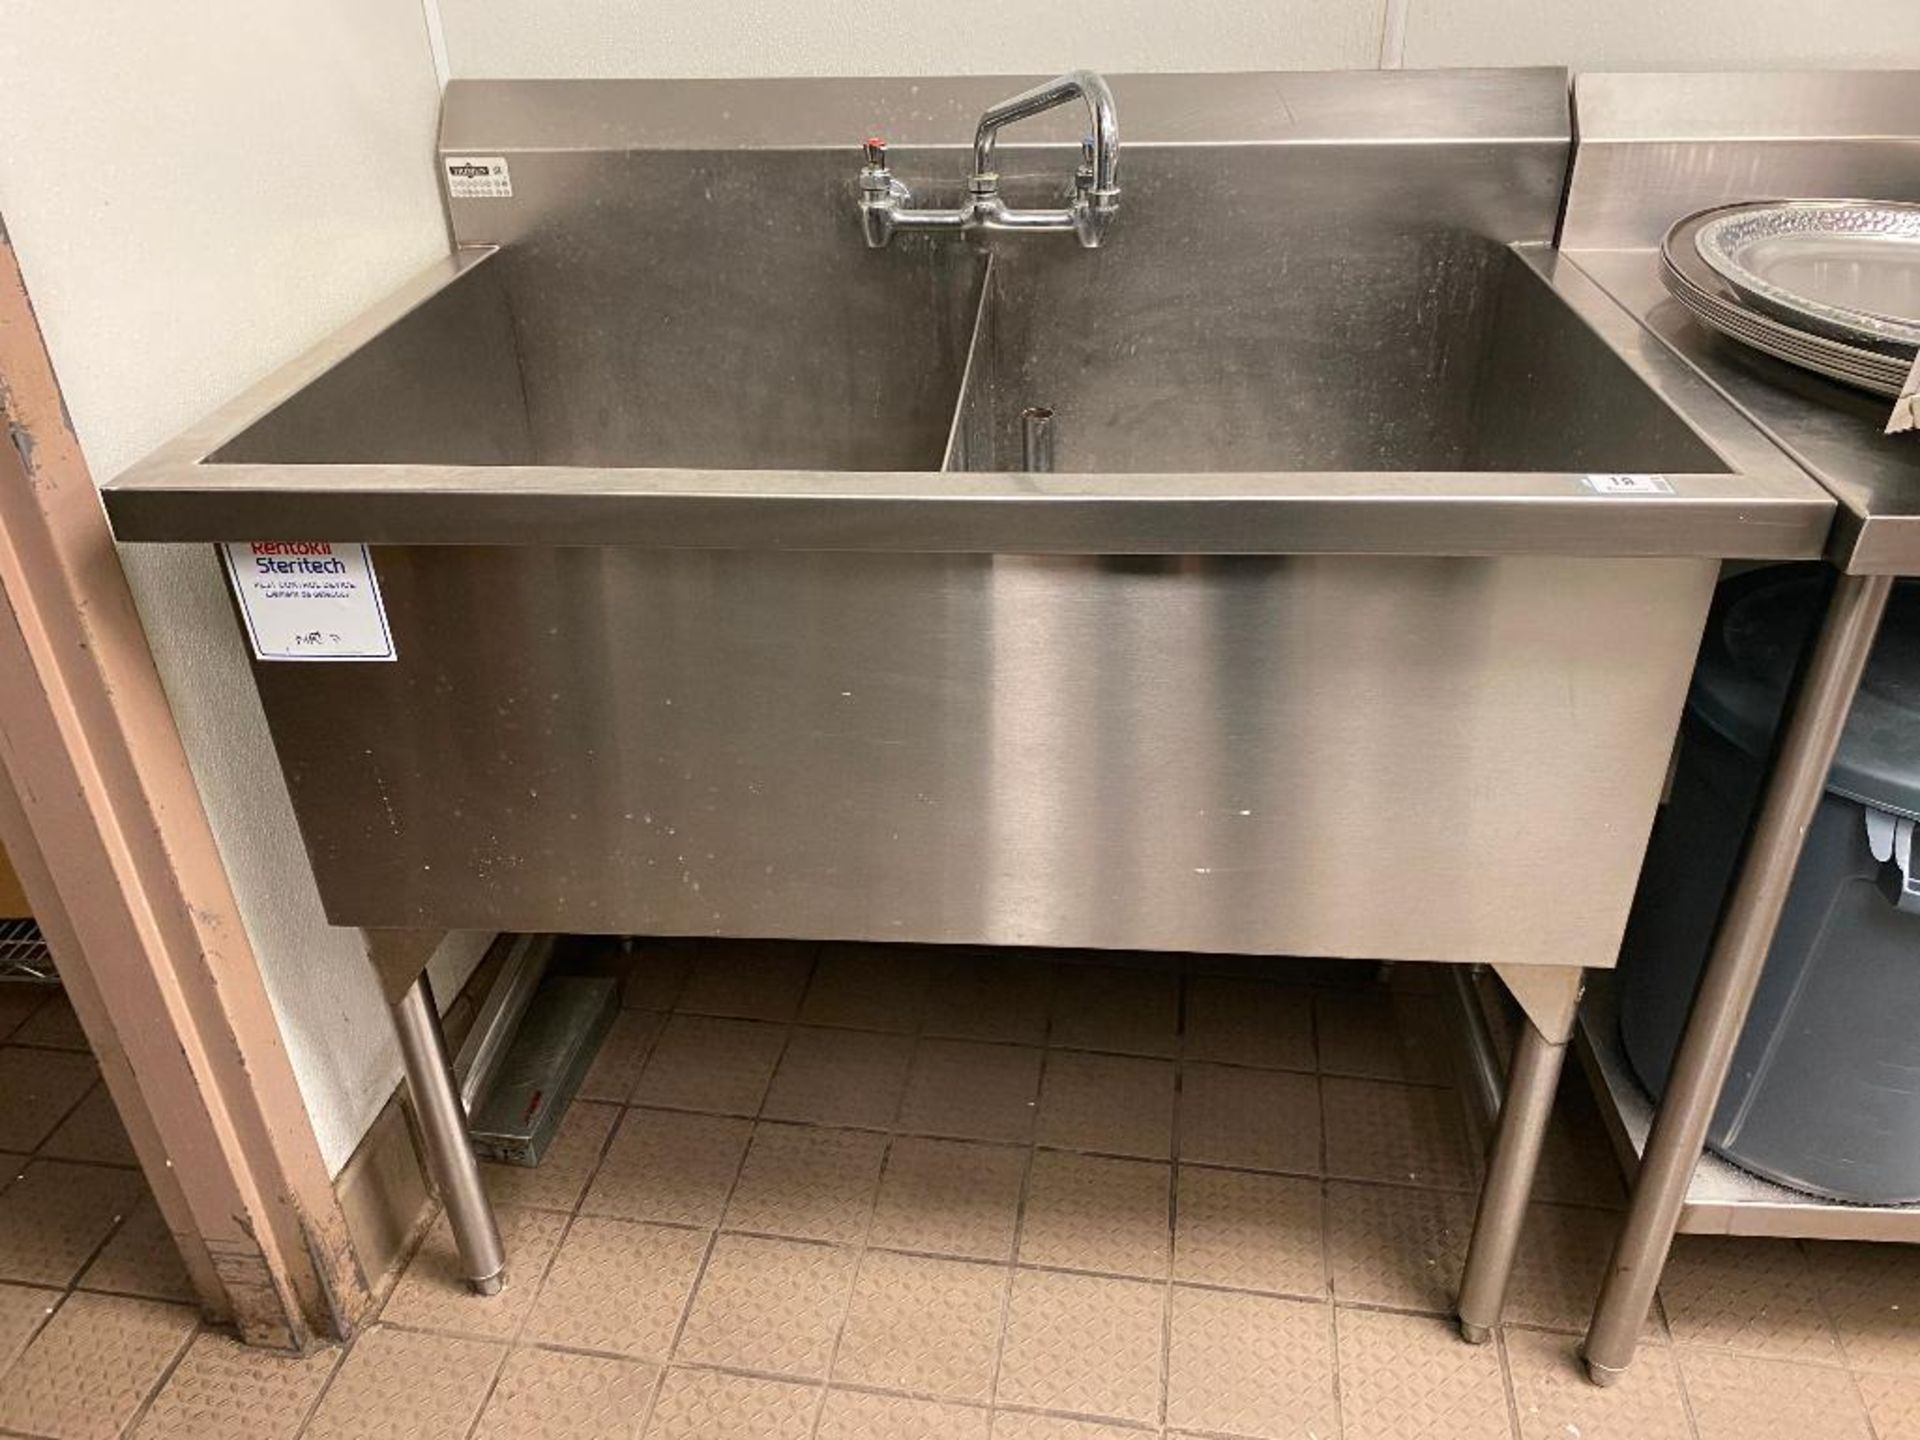 TRIMEN 2 WELL STAINLESS STEEL SINK - NOTE: REQUIRES DISCONNECT, PLEASE INSPECT